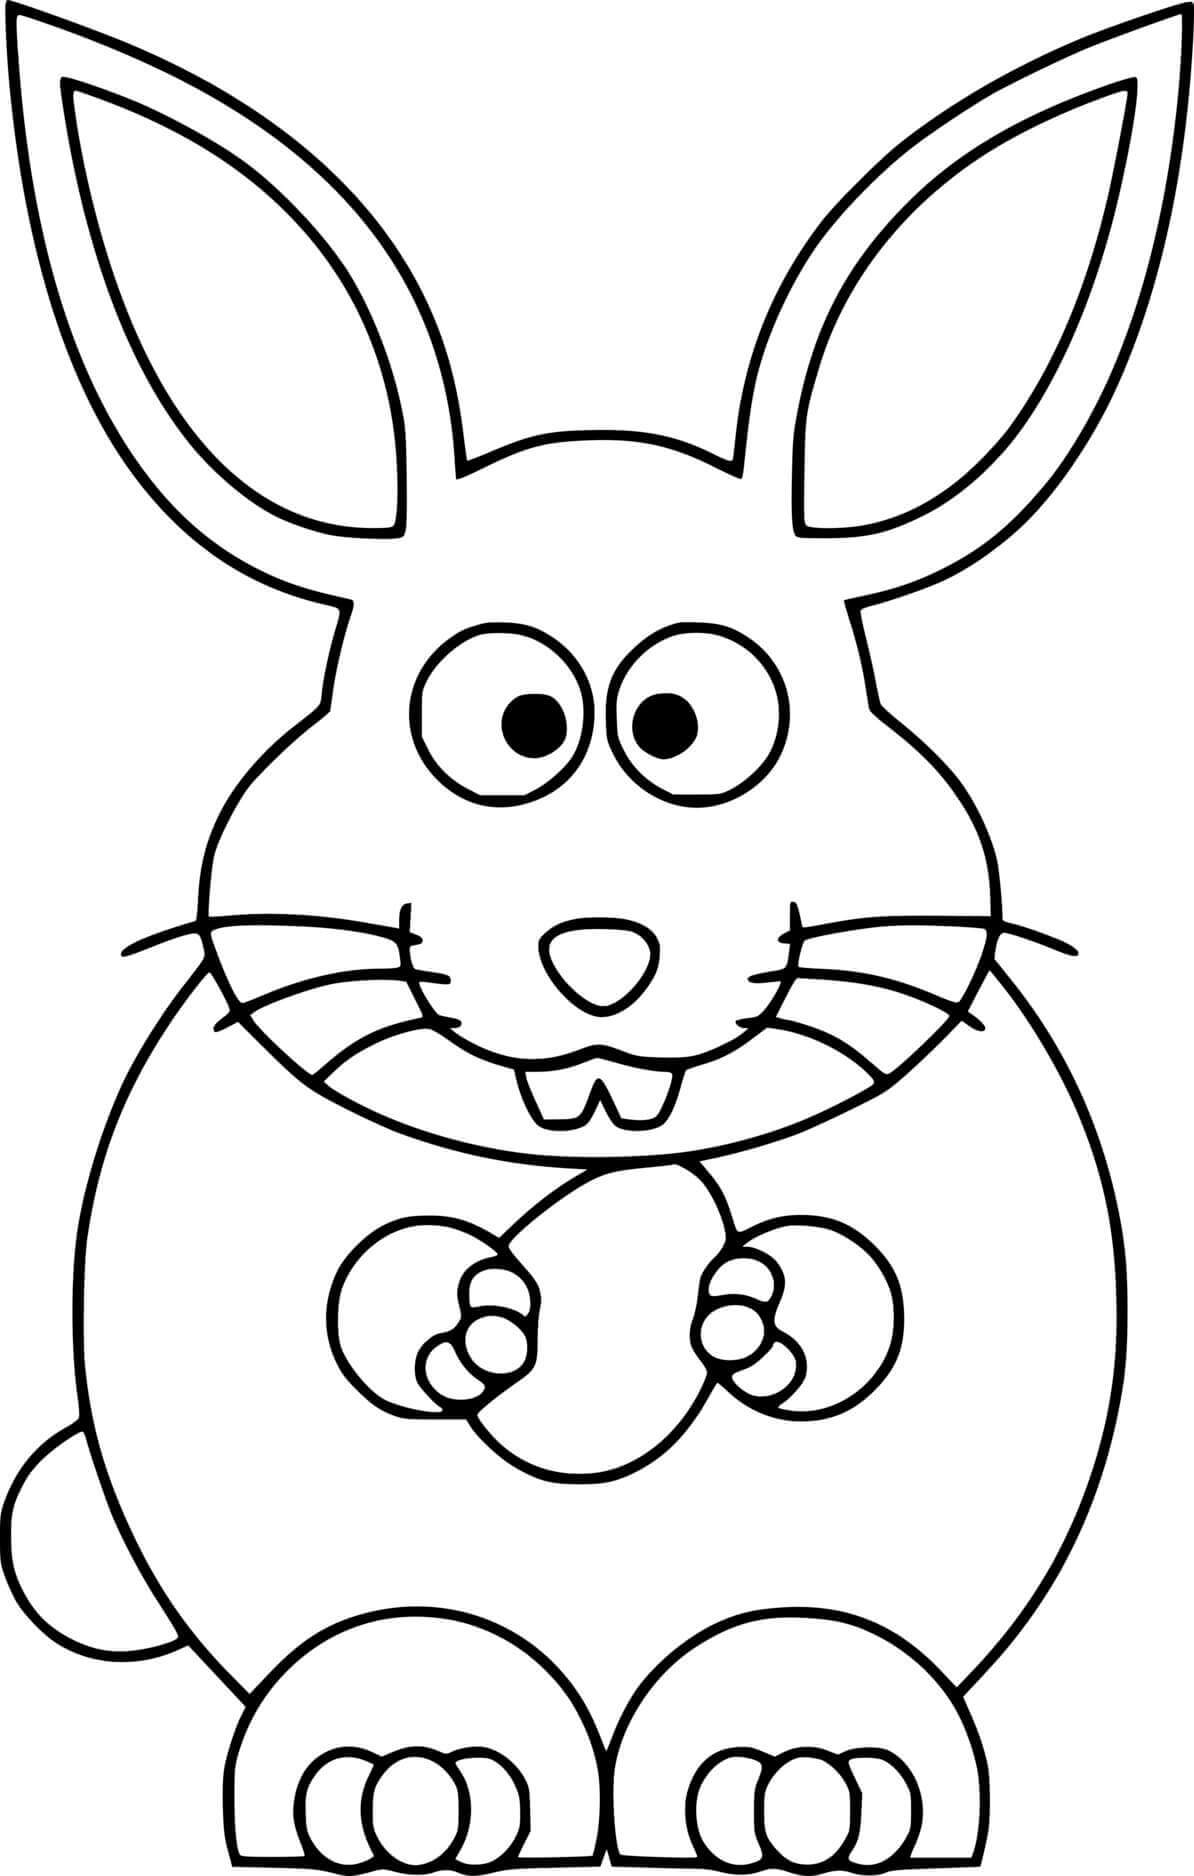 Easter Bunny Holds A Small Egg Coloring Page